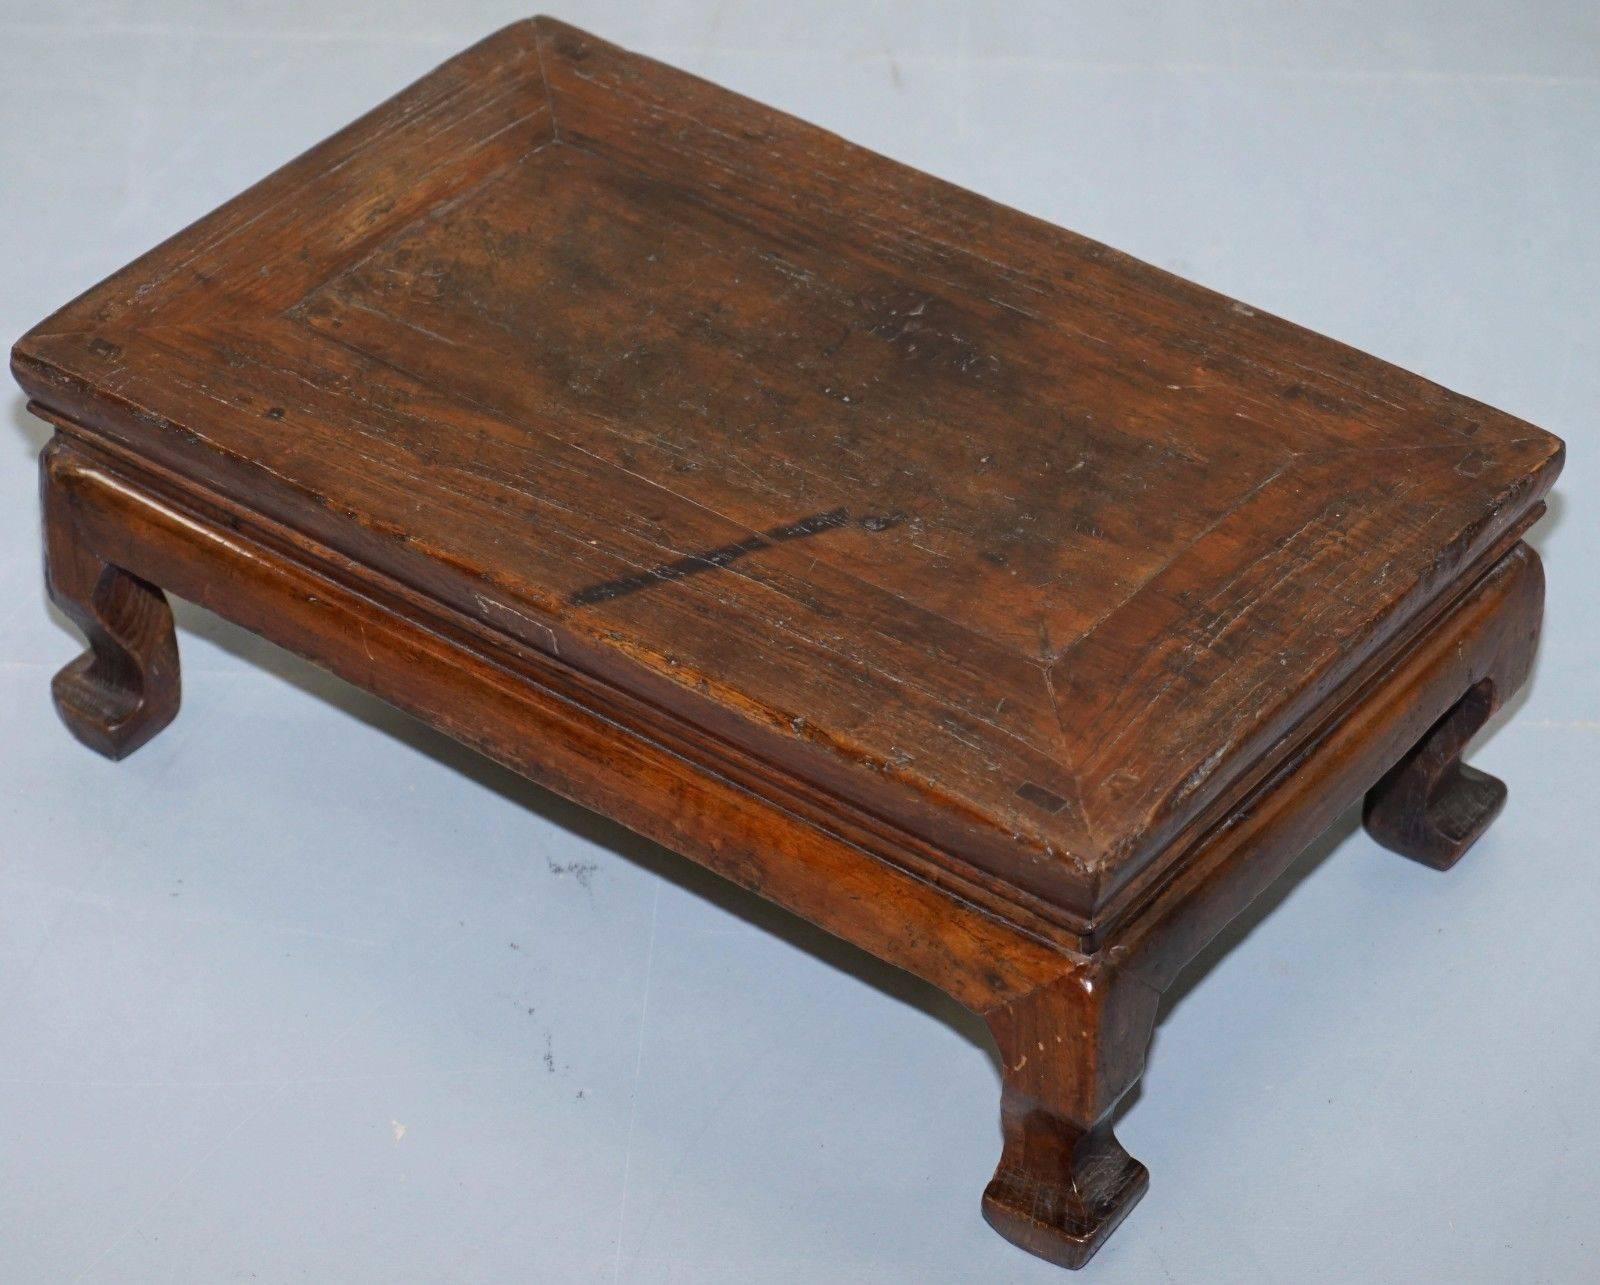 We are delighted to offer for sale this very rare original, circa 1820 small Chinese Juma Kang table

Great as a little coffee or side table, the patina to the timber is to die for, do a little research and larger versions of these sell in the